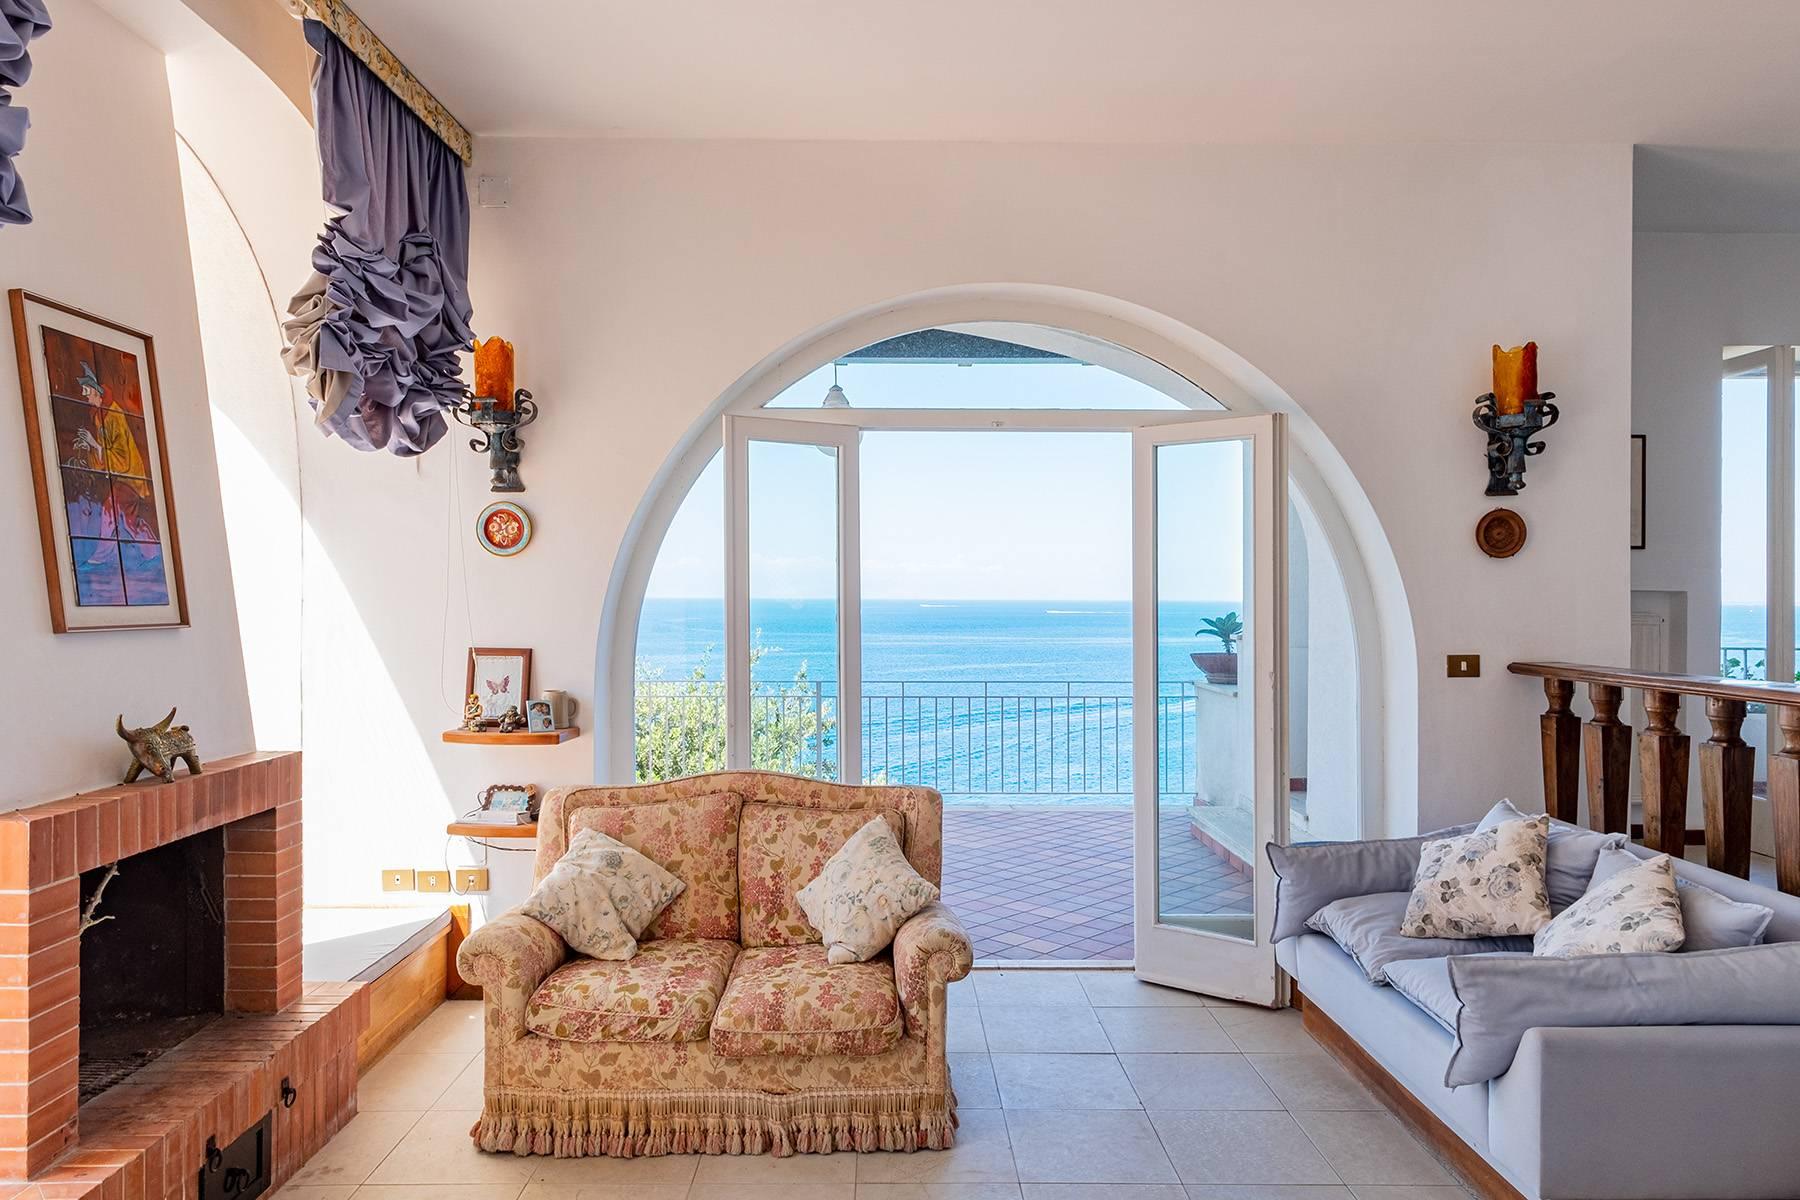 Mediterranean Villa pied dans l'eau with pool and private access to the sea - 8